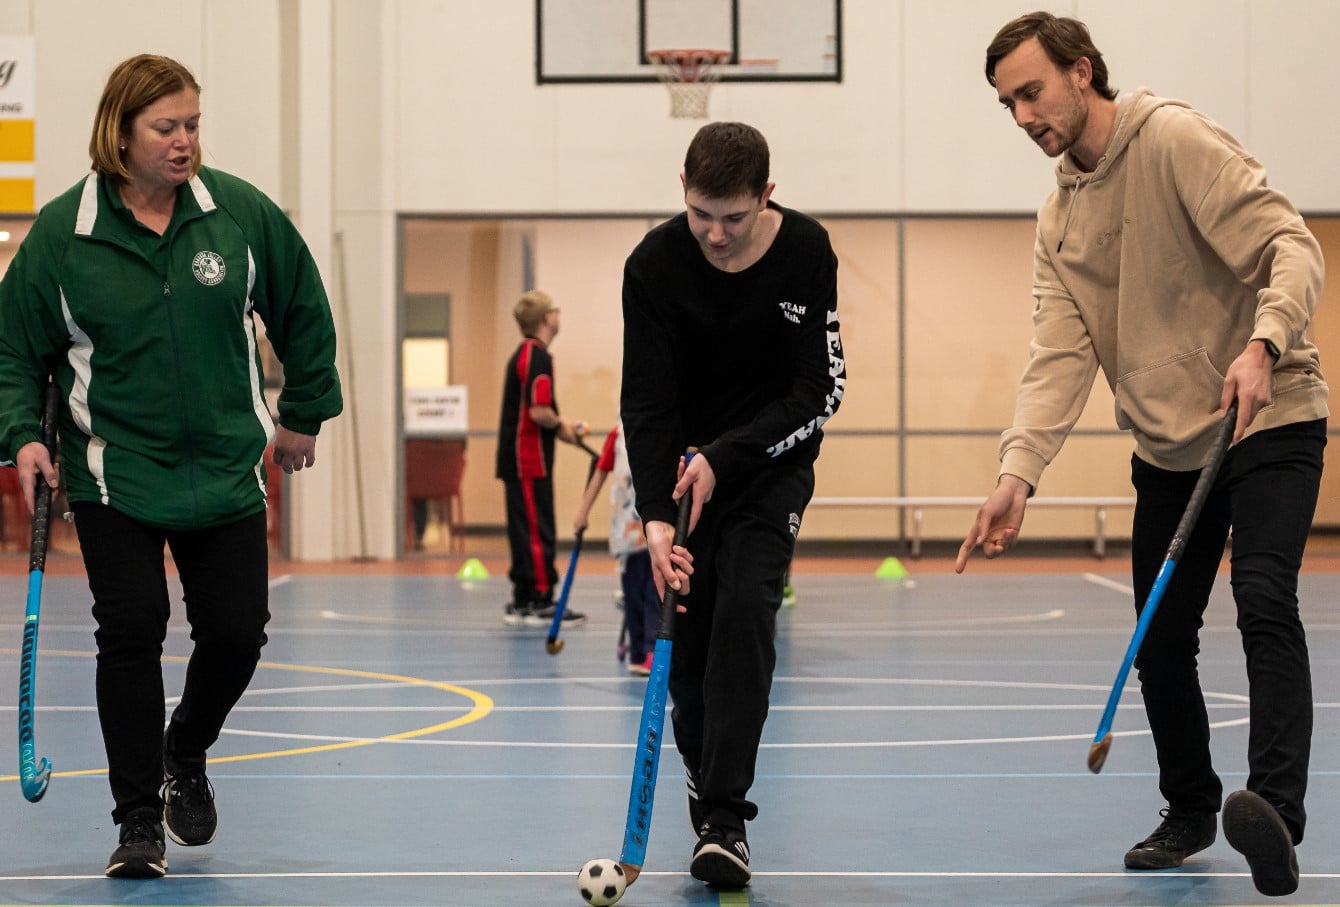 3 people playing a game of accessible hockey. The person in the middle is using his hockey stick to move a bigger than usual hockey ball.